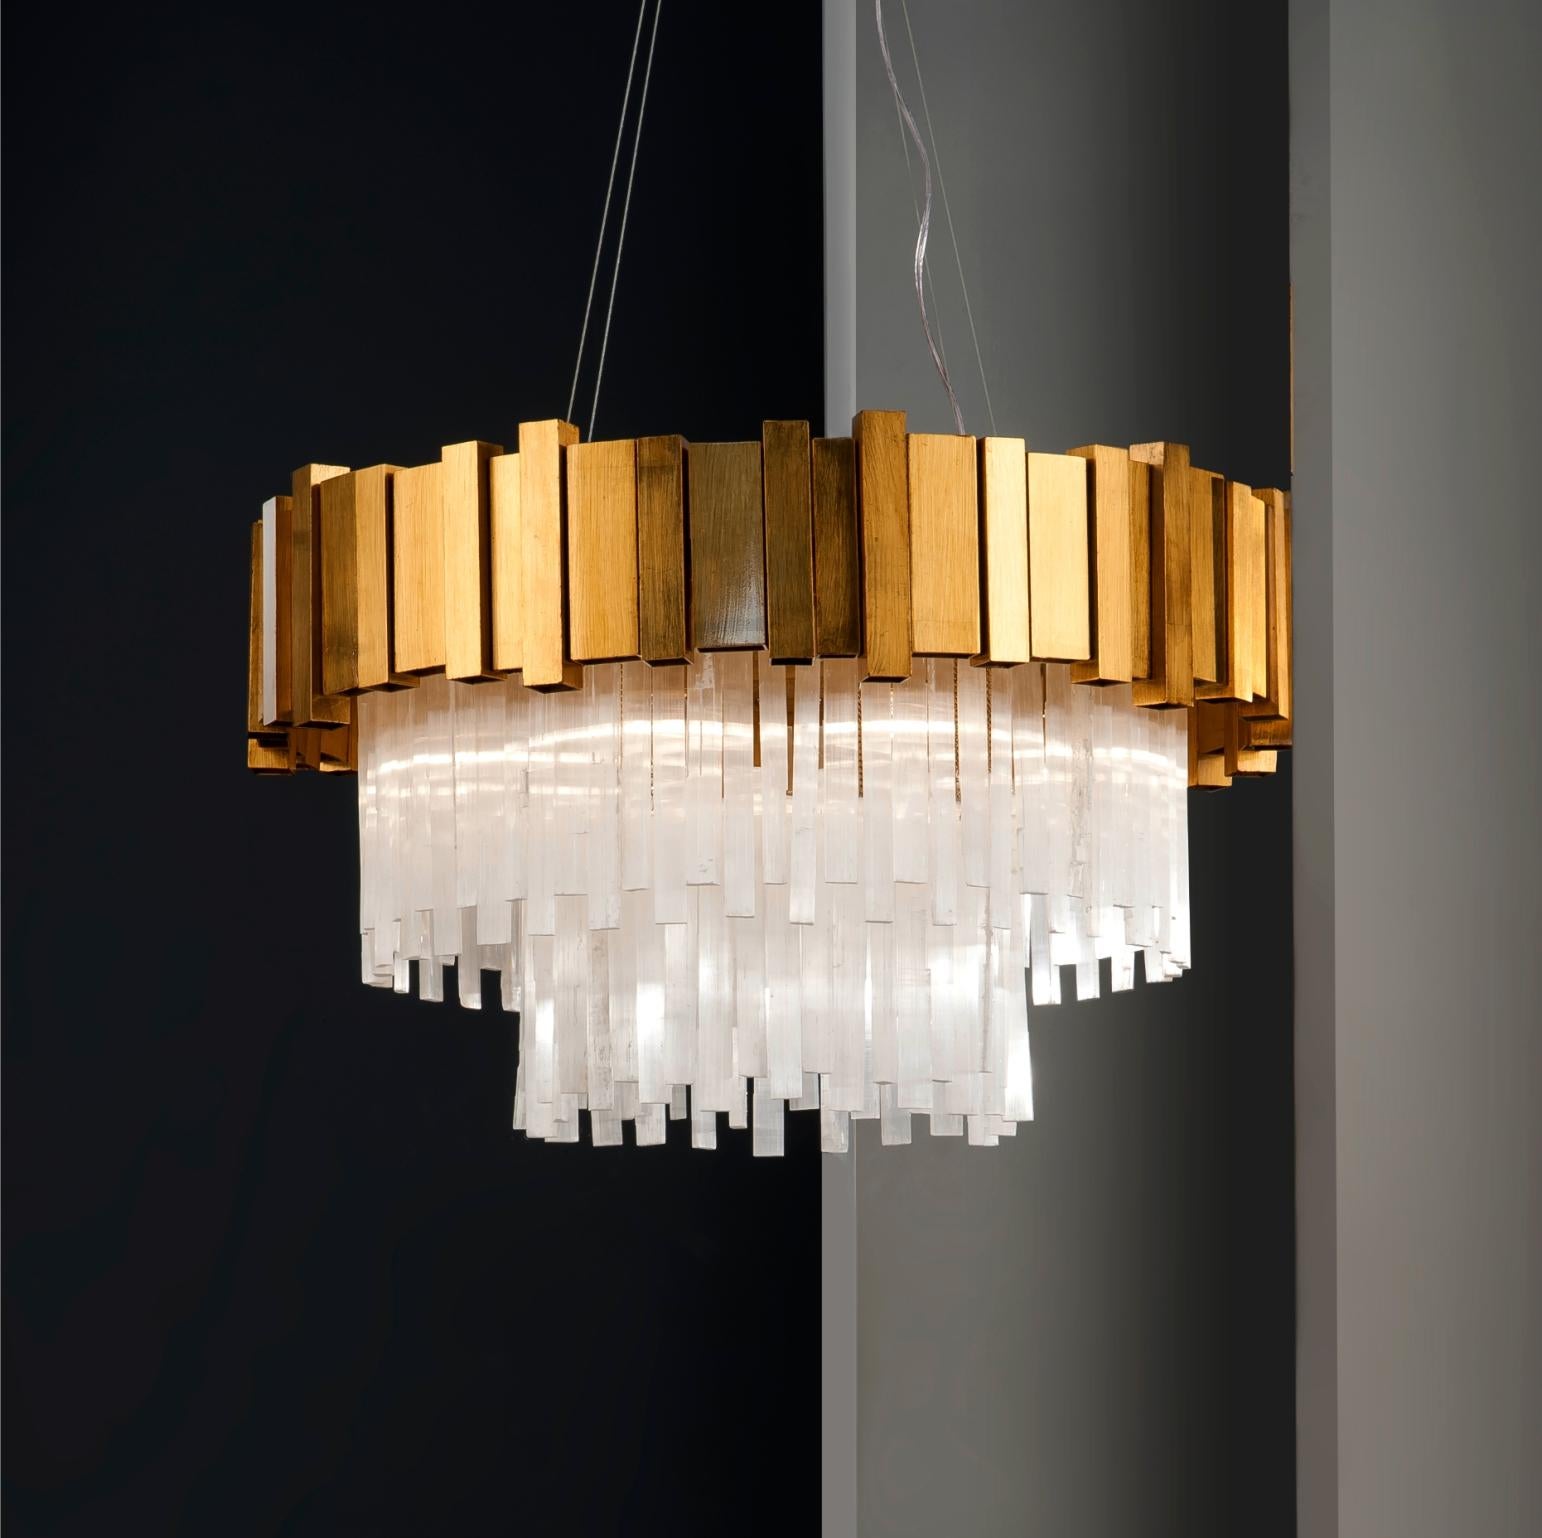 Natural Stone chandelier lamp by Aver 
Dimensions: Diameter 76 x Height 48 cm 
Materials: Aluminum, plated. Natural Moroccan/clear rock, Moroccan rock.
Lighting: 08 x E-14 25w.
Finish: Silver veneer, aged silver veneer, gold veneer, aged gold